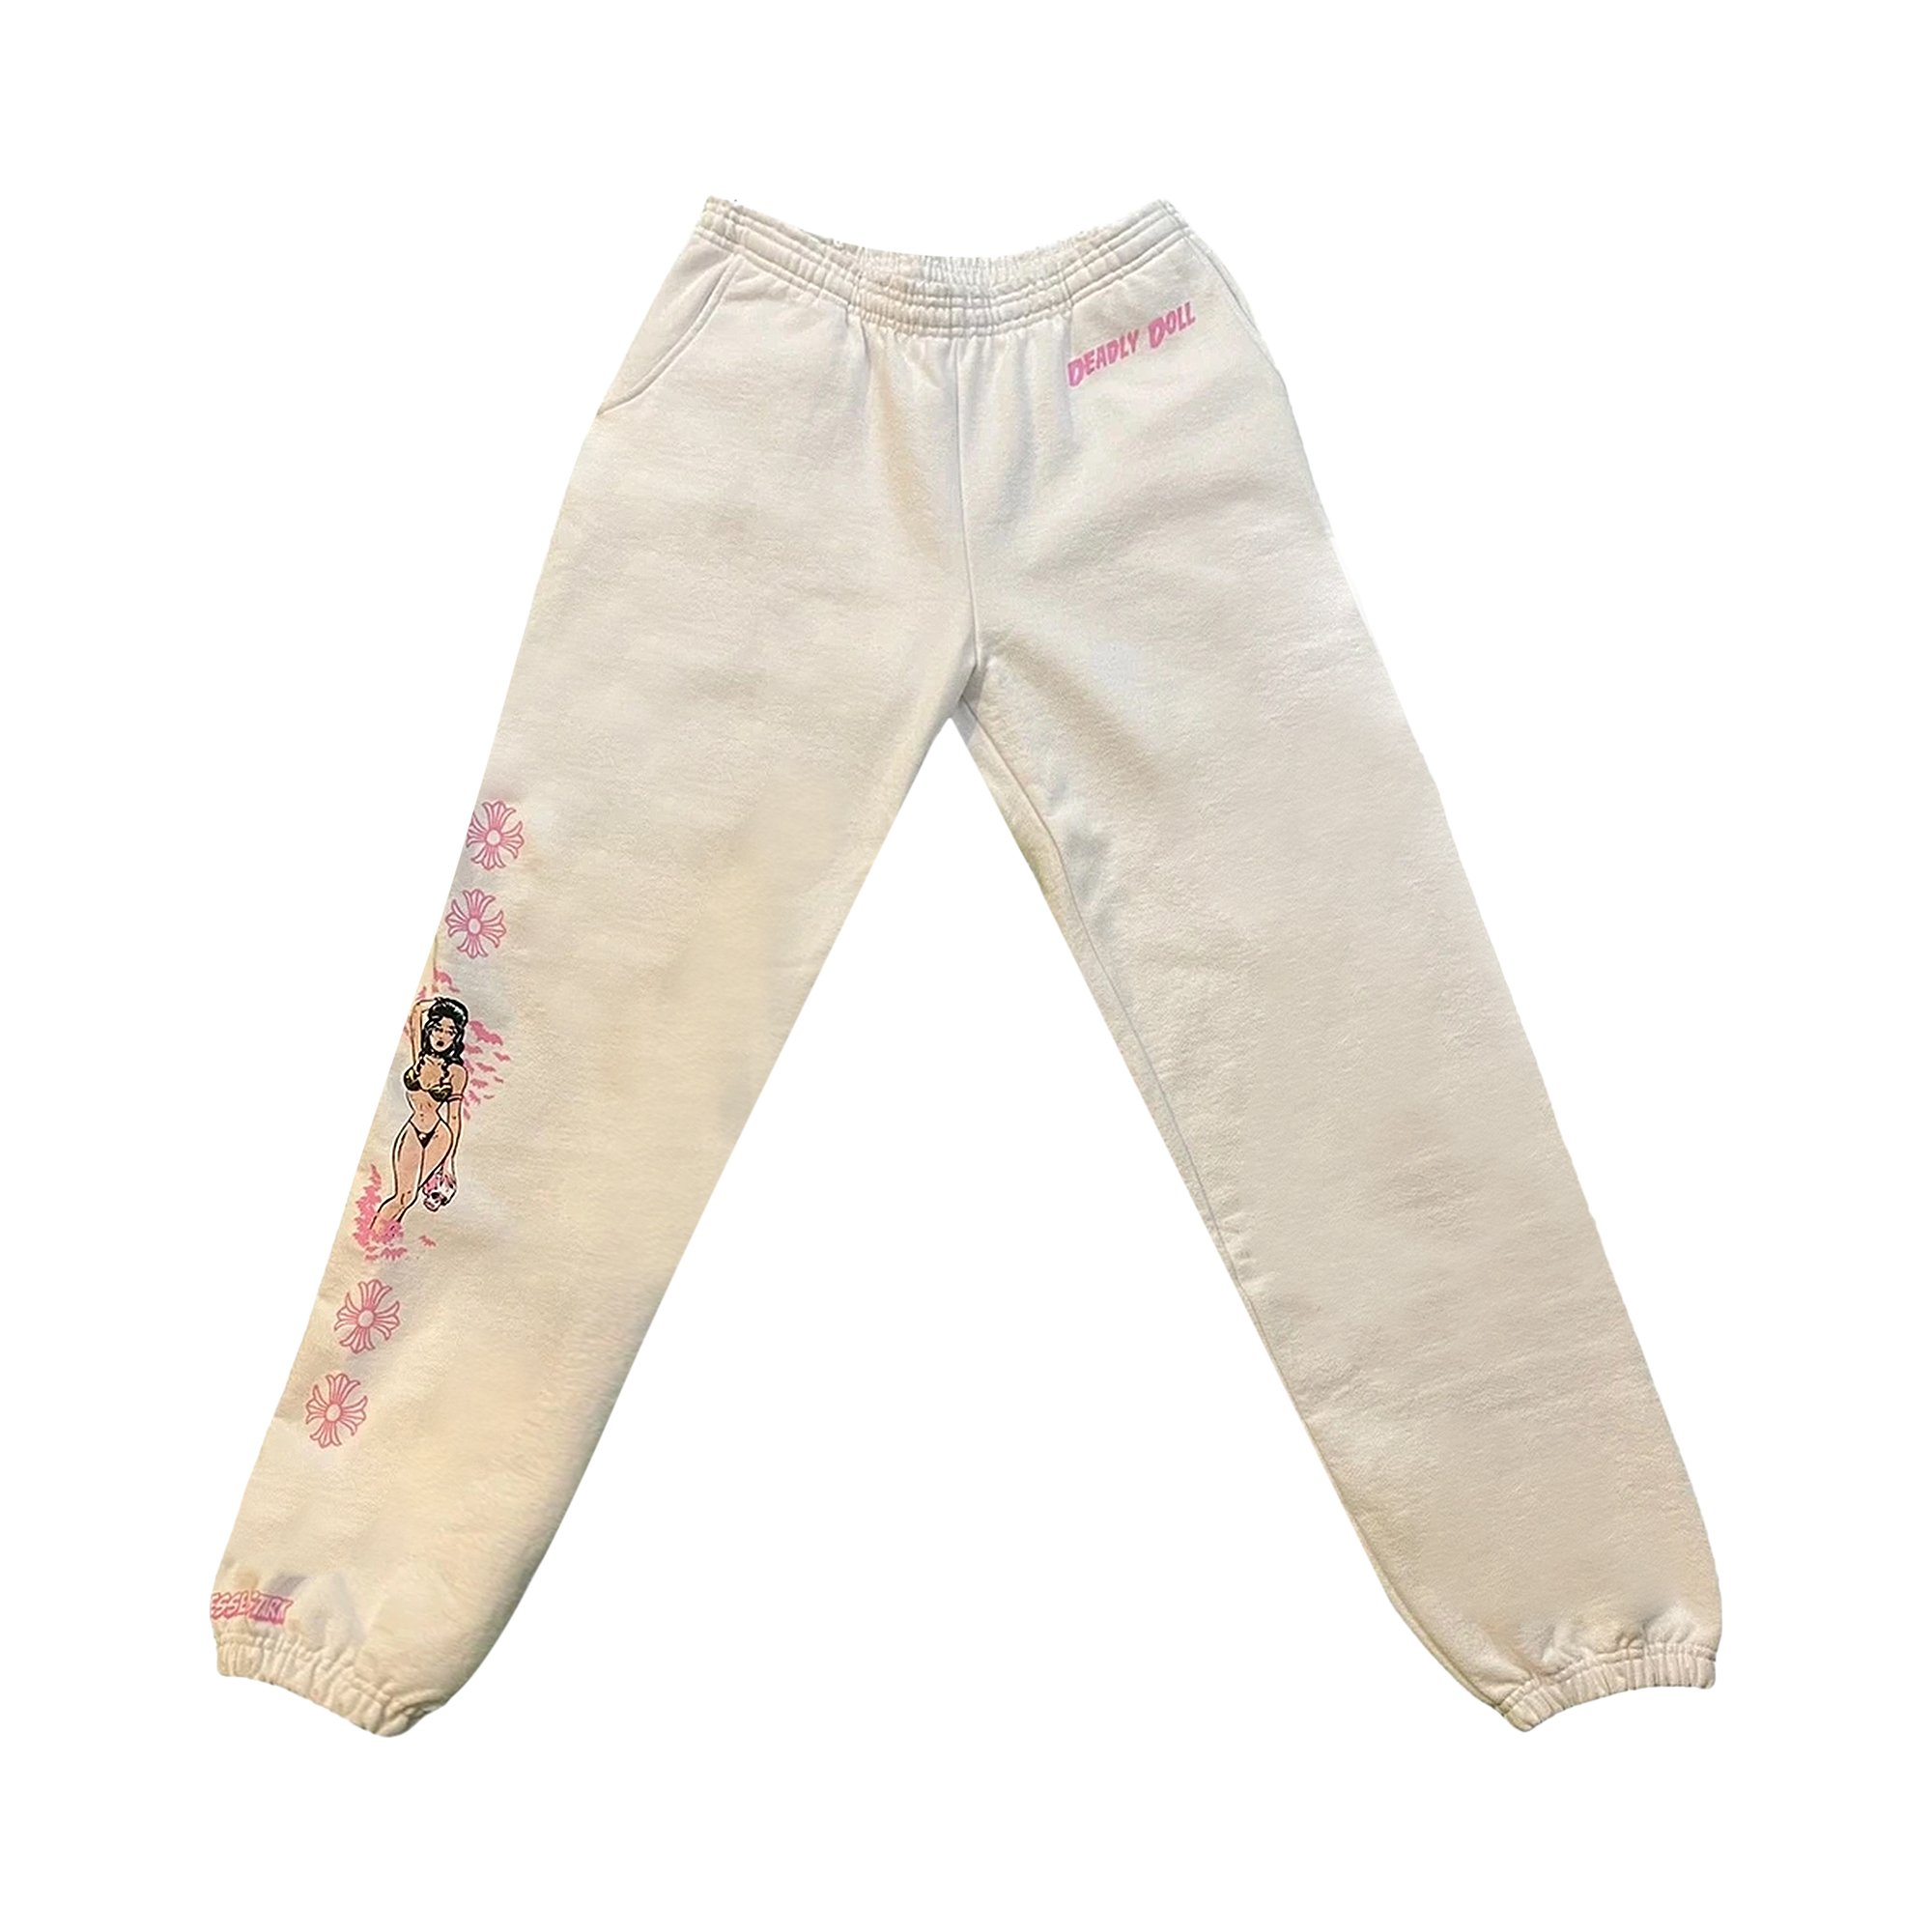 Buy Chrome Hearts x Deadly Doll Sweatpants 'White/Pink' - 1383 